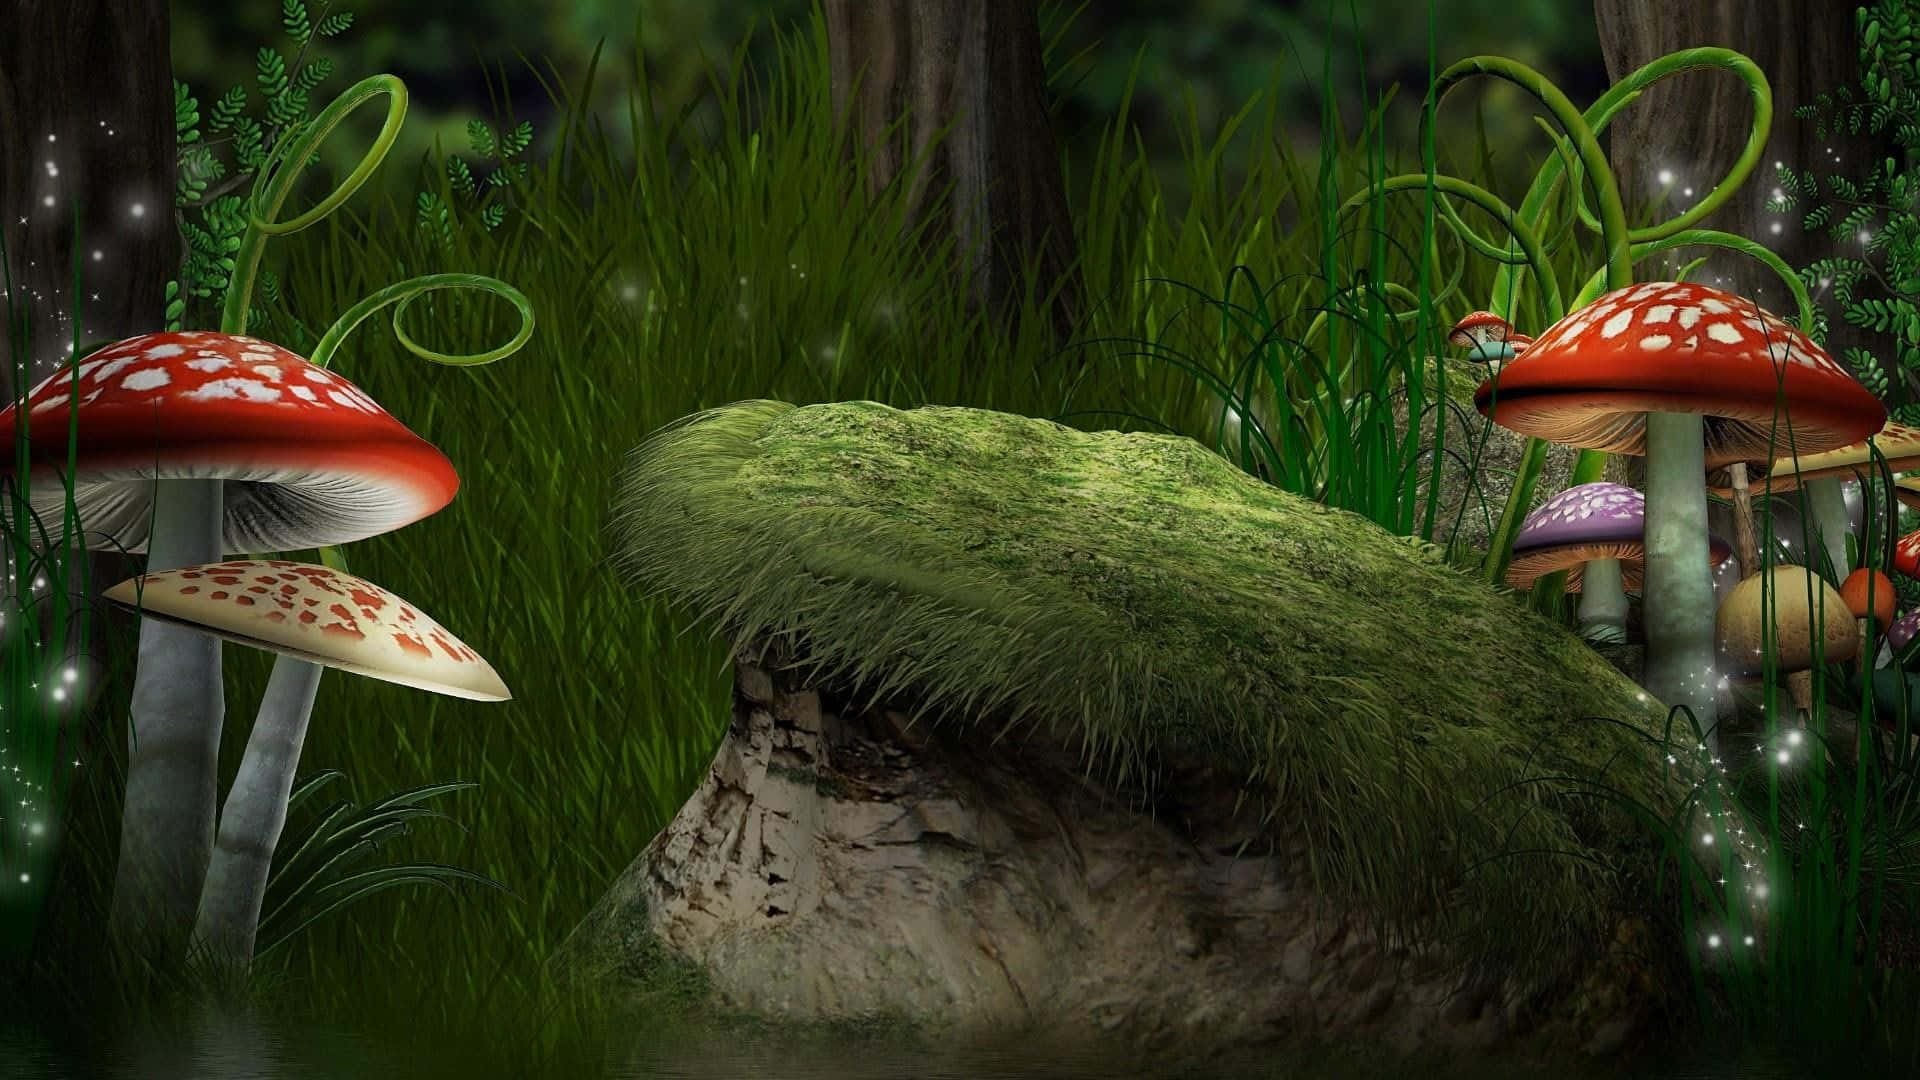 Giant Fly Agaric Fungus Realistic Digital Art Picture